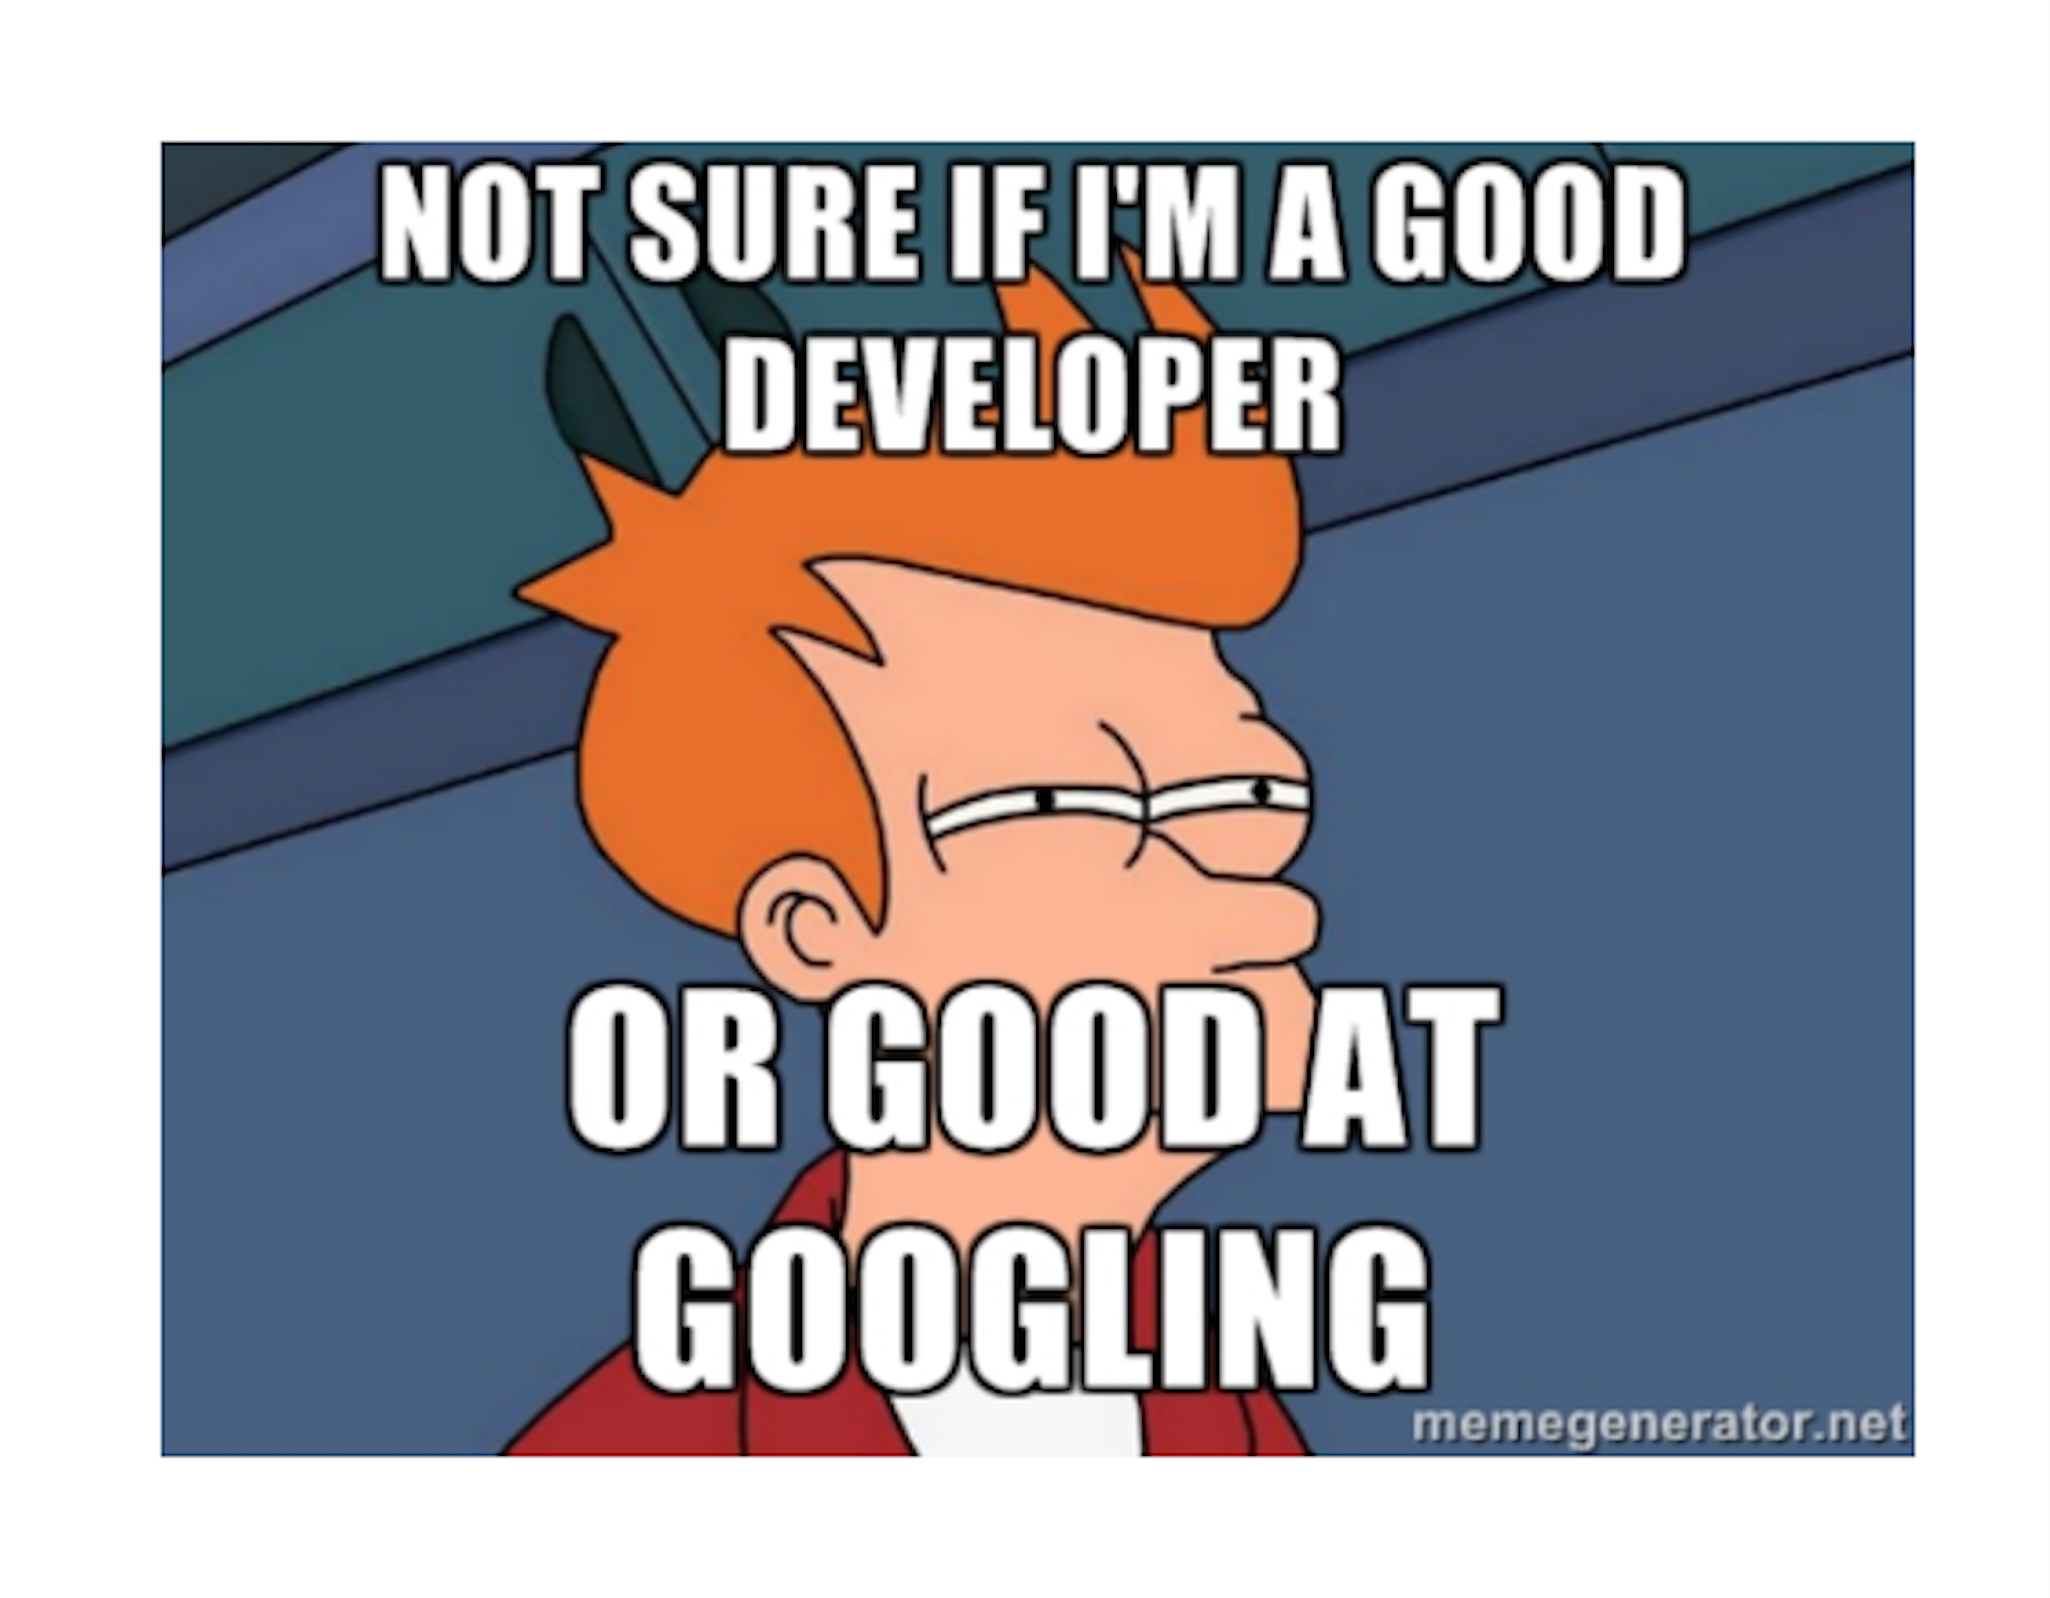 I'm not sure if I'm a good developer or good at googling